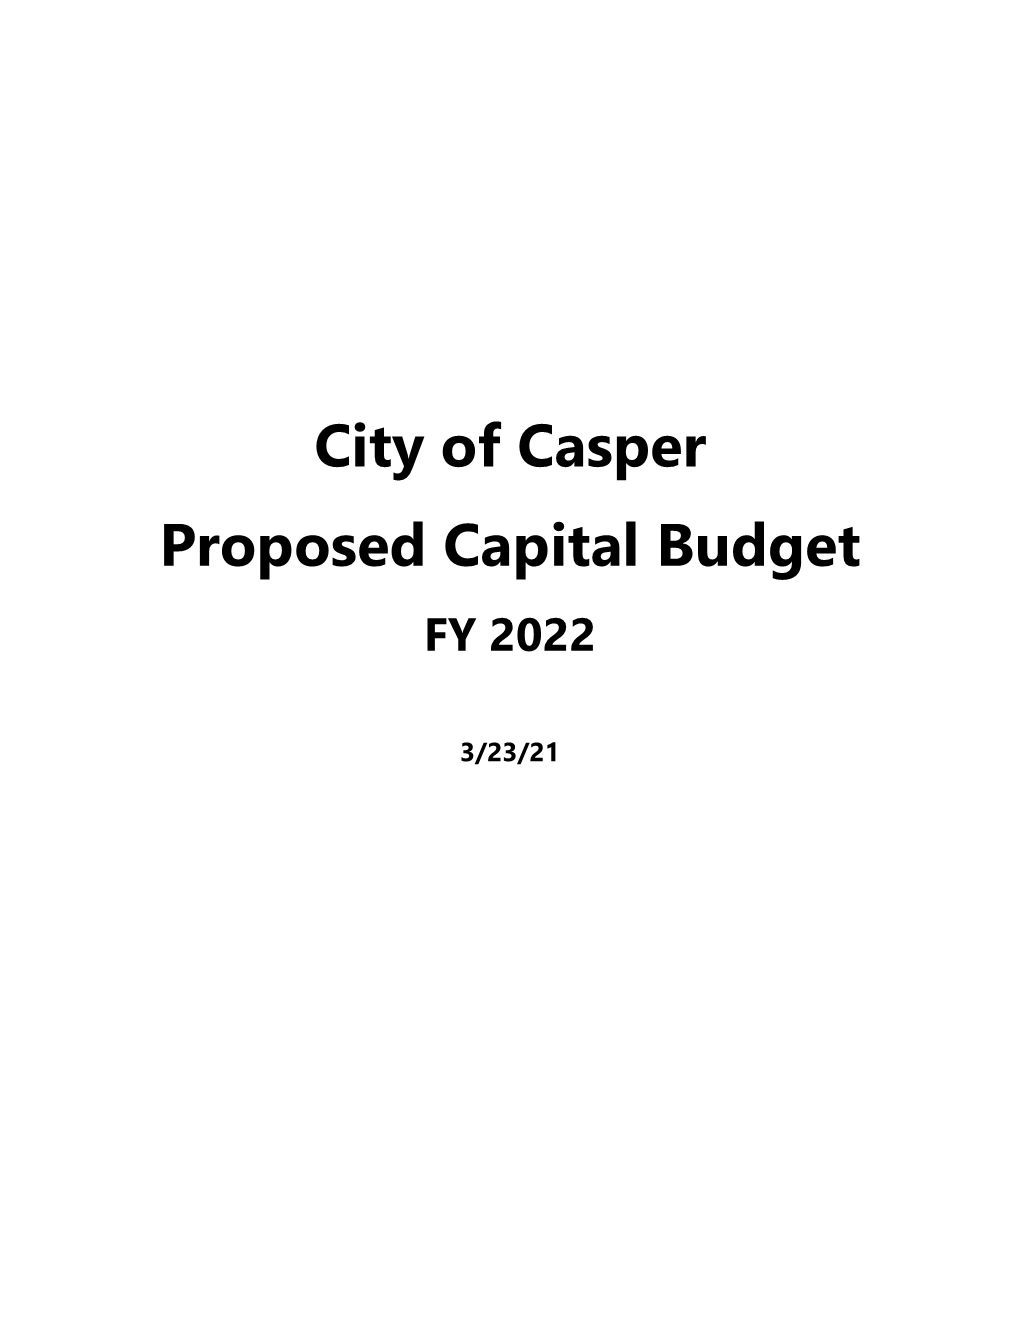 Capital Projects for the Upcoming Fiscal Year